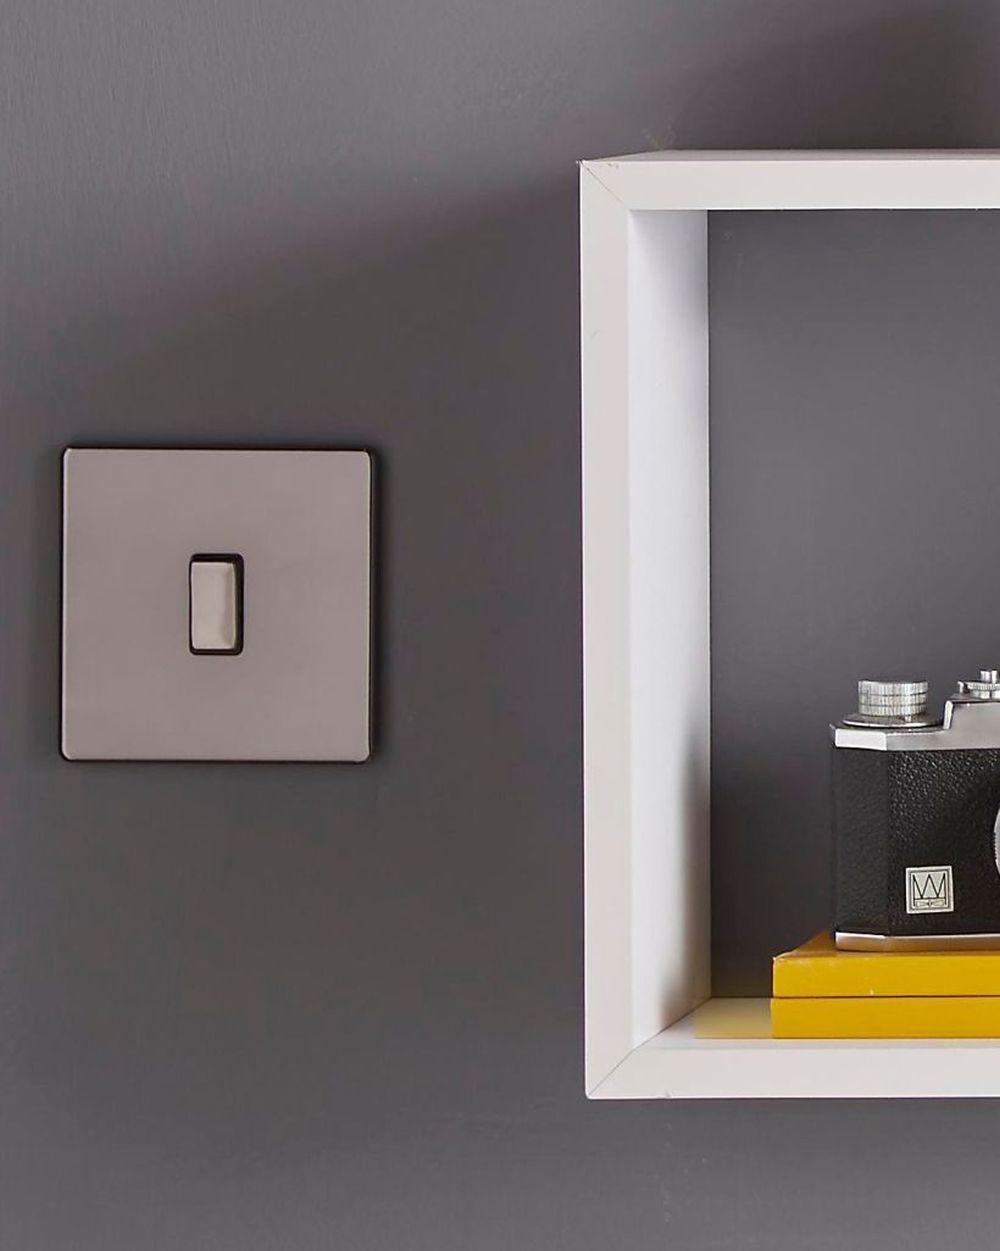 elegant modern mobile home style with grey light switch with white cubical shelving unit on wall